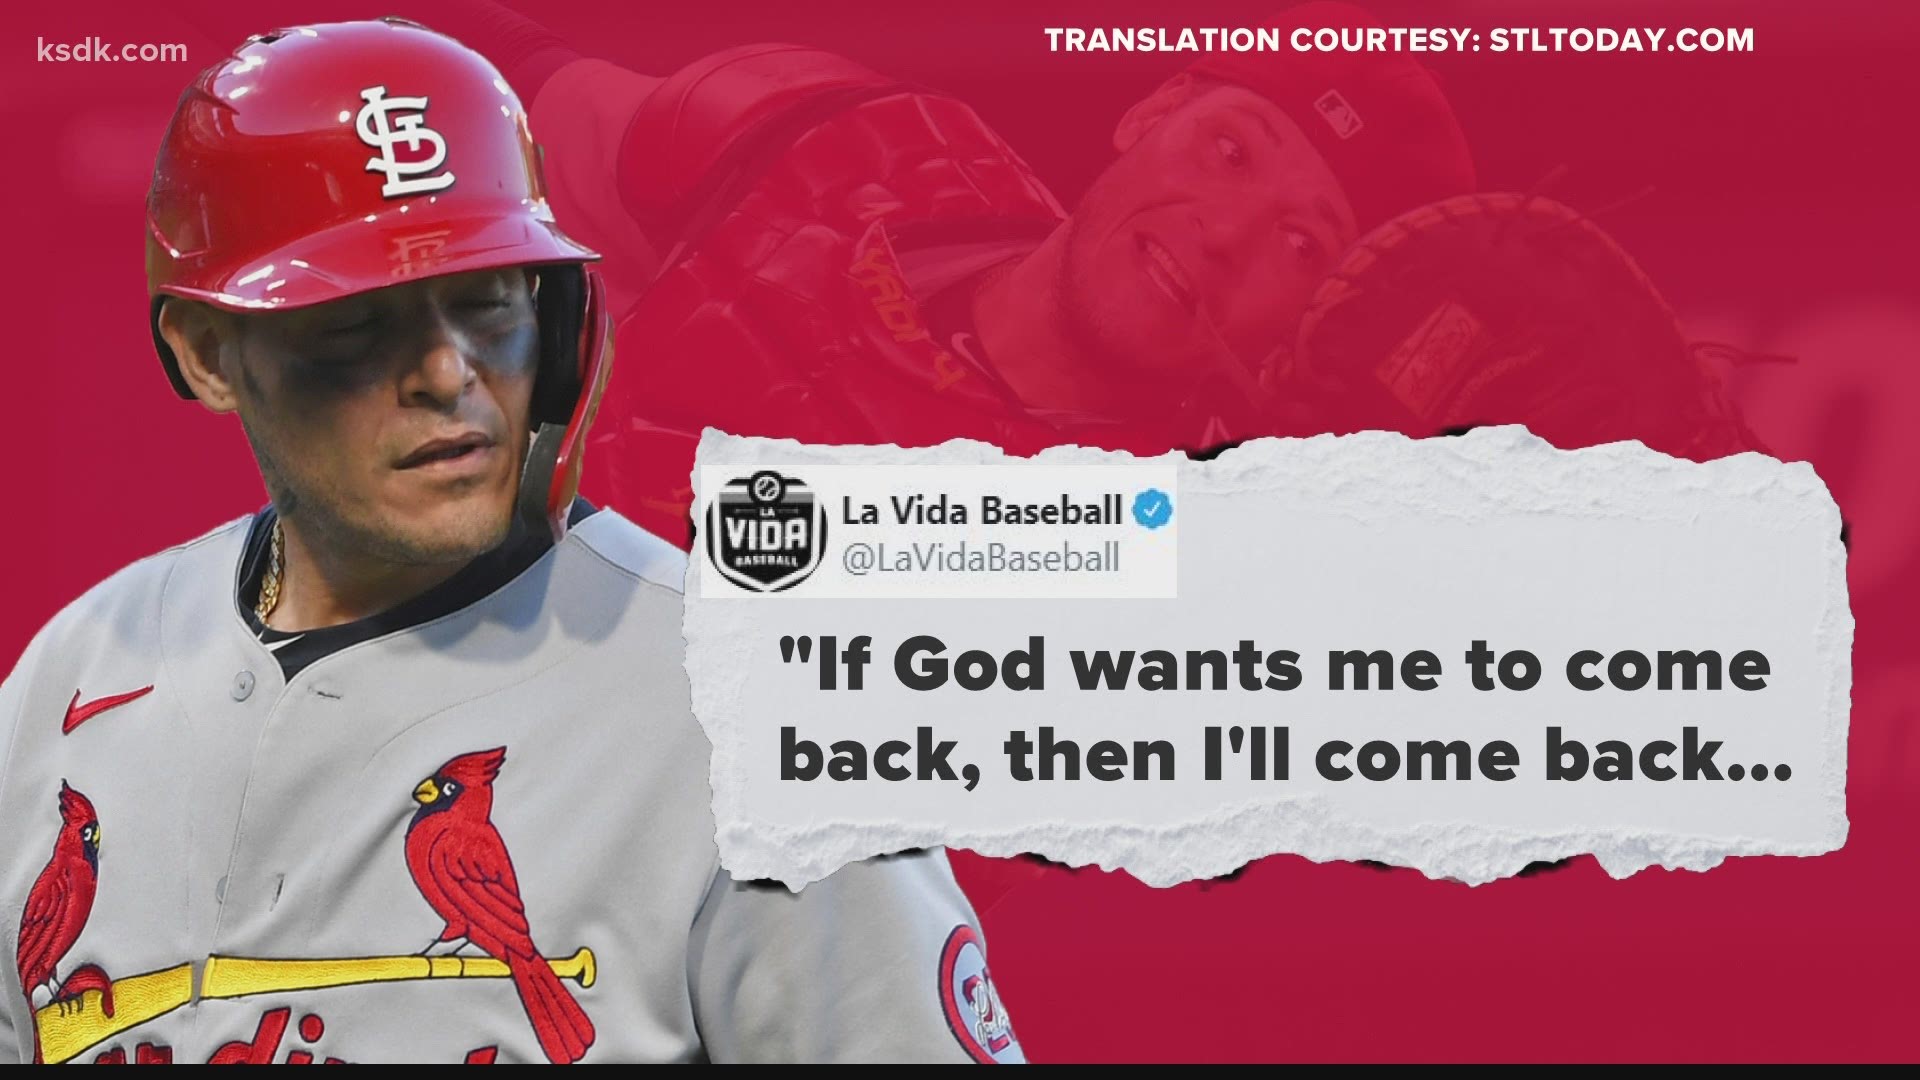 Molina has been with the Cardinals his entire career, and just recently reached the 2,000 hit plateau during the 2020 season